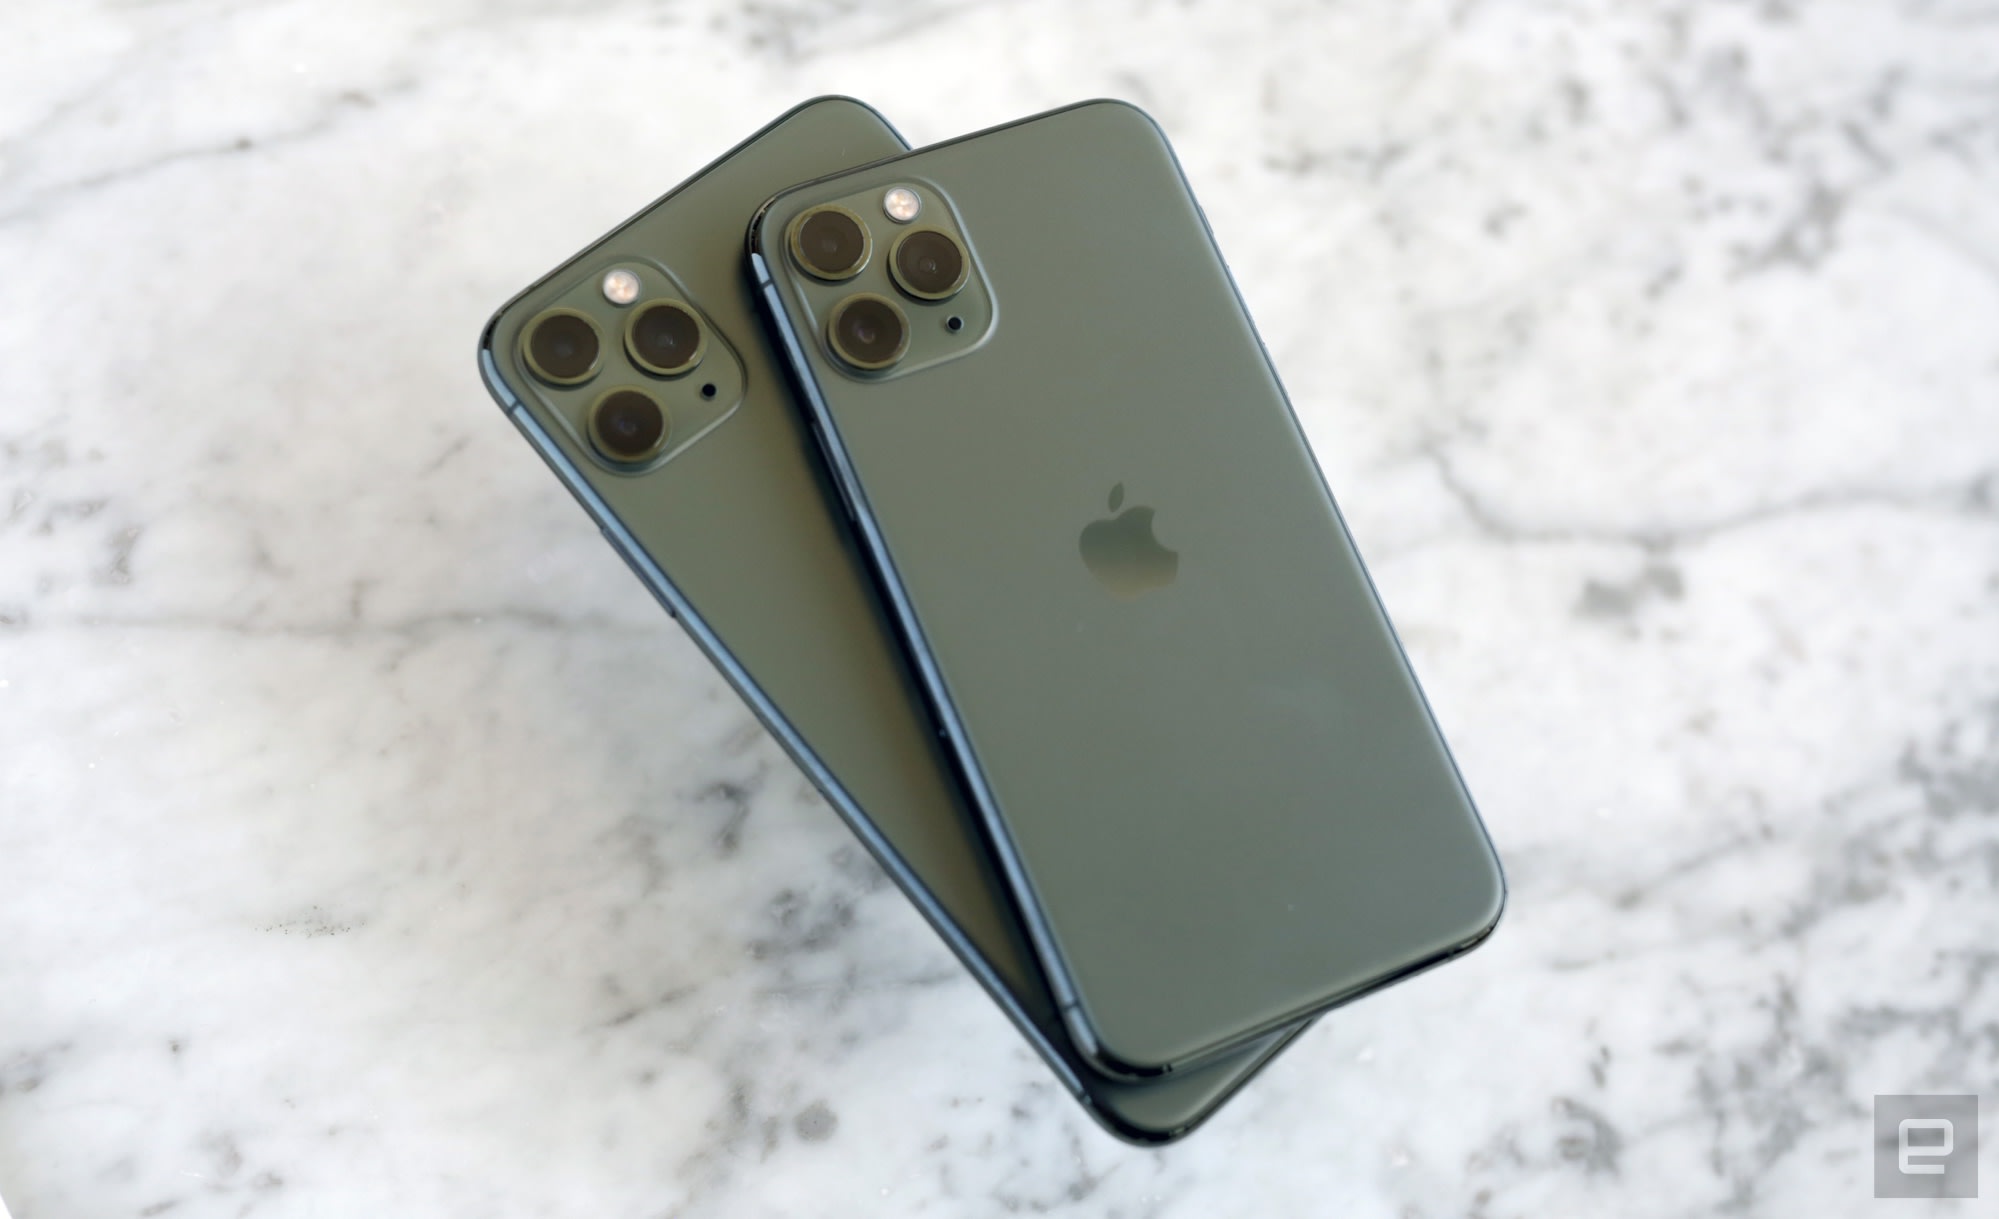 Apple iPhone 11 and iPhone 11 Pro Max: A summary of initial reviews -   Reviews